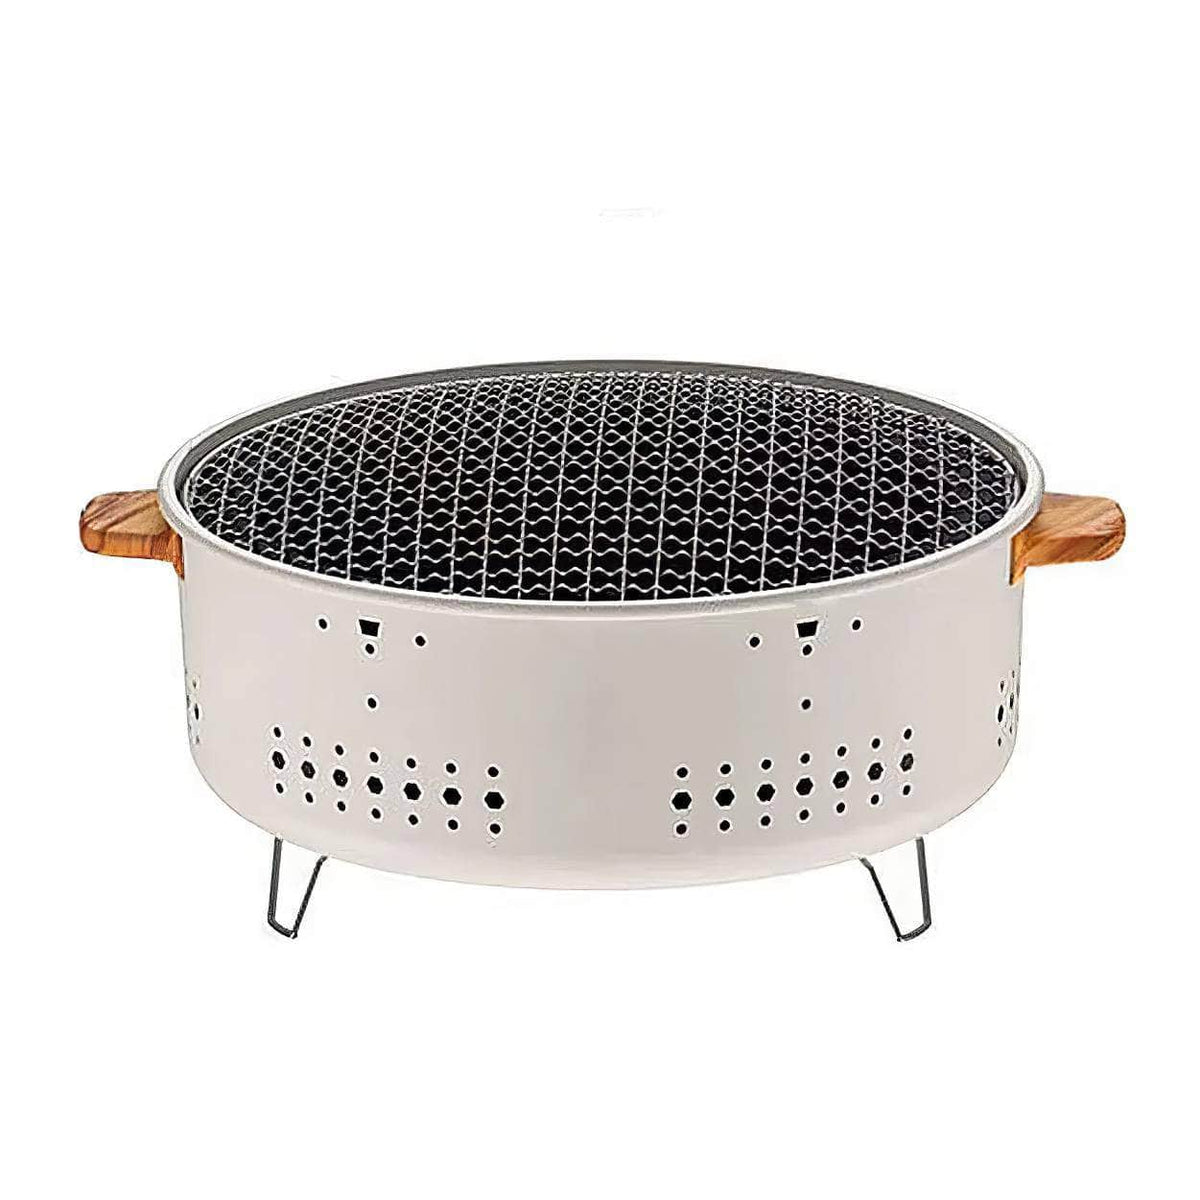 Portable Round Barbecue Stove - Multifunctional Charcoal Oven for Outdoor CHINA